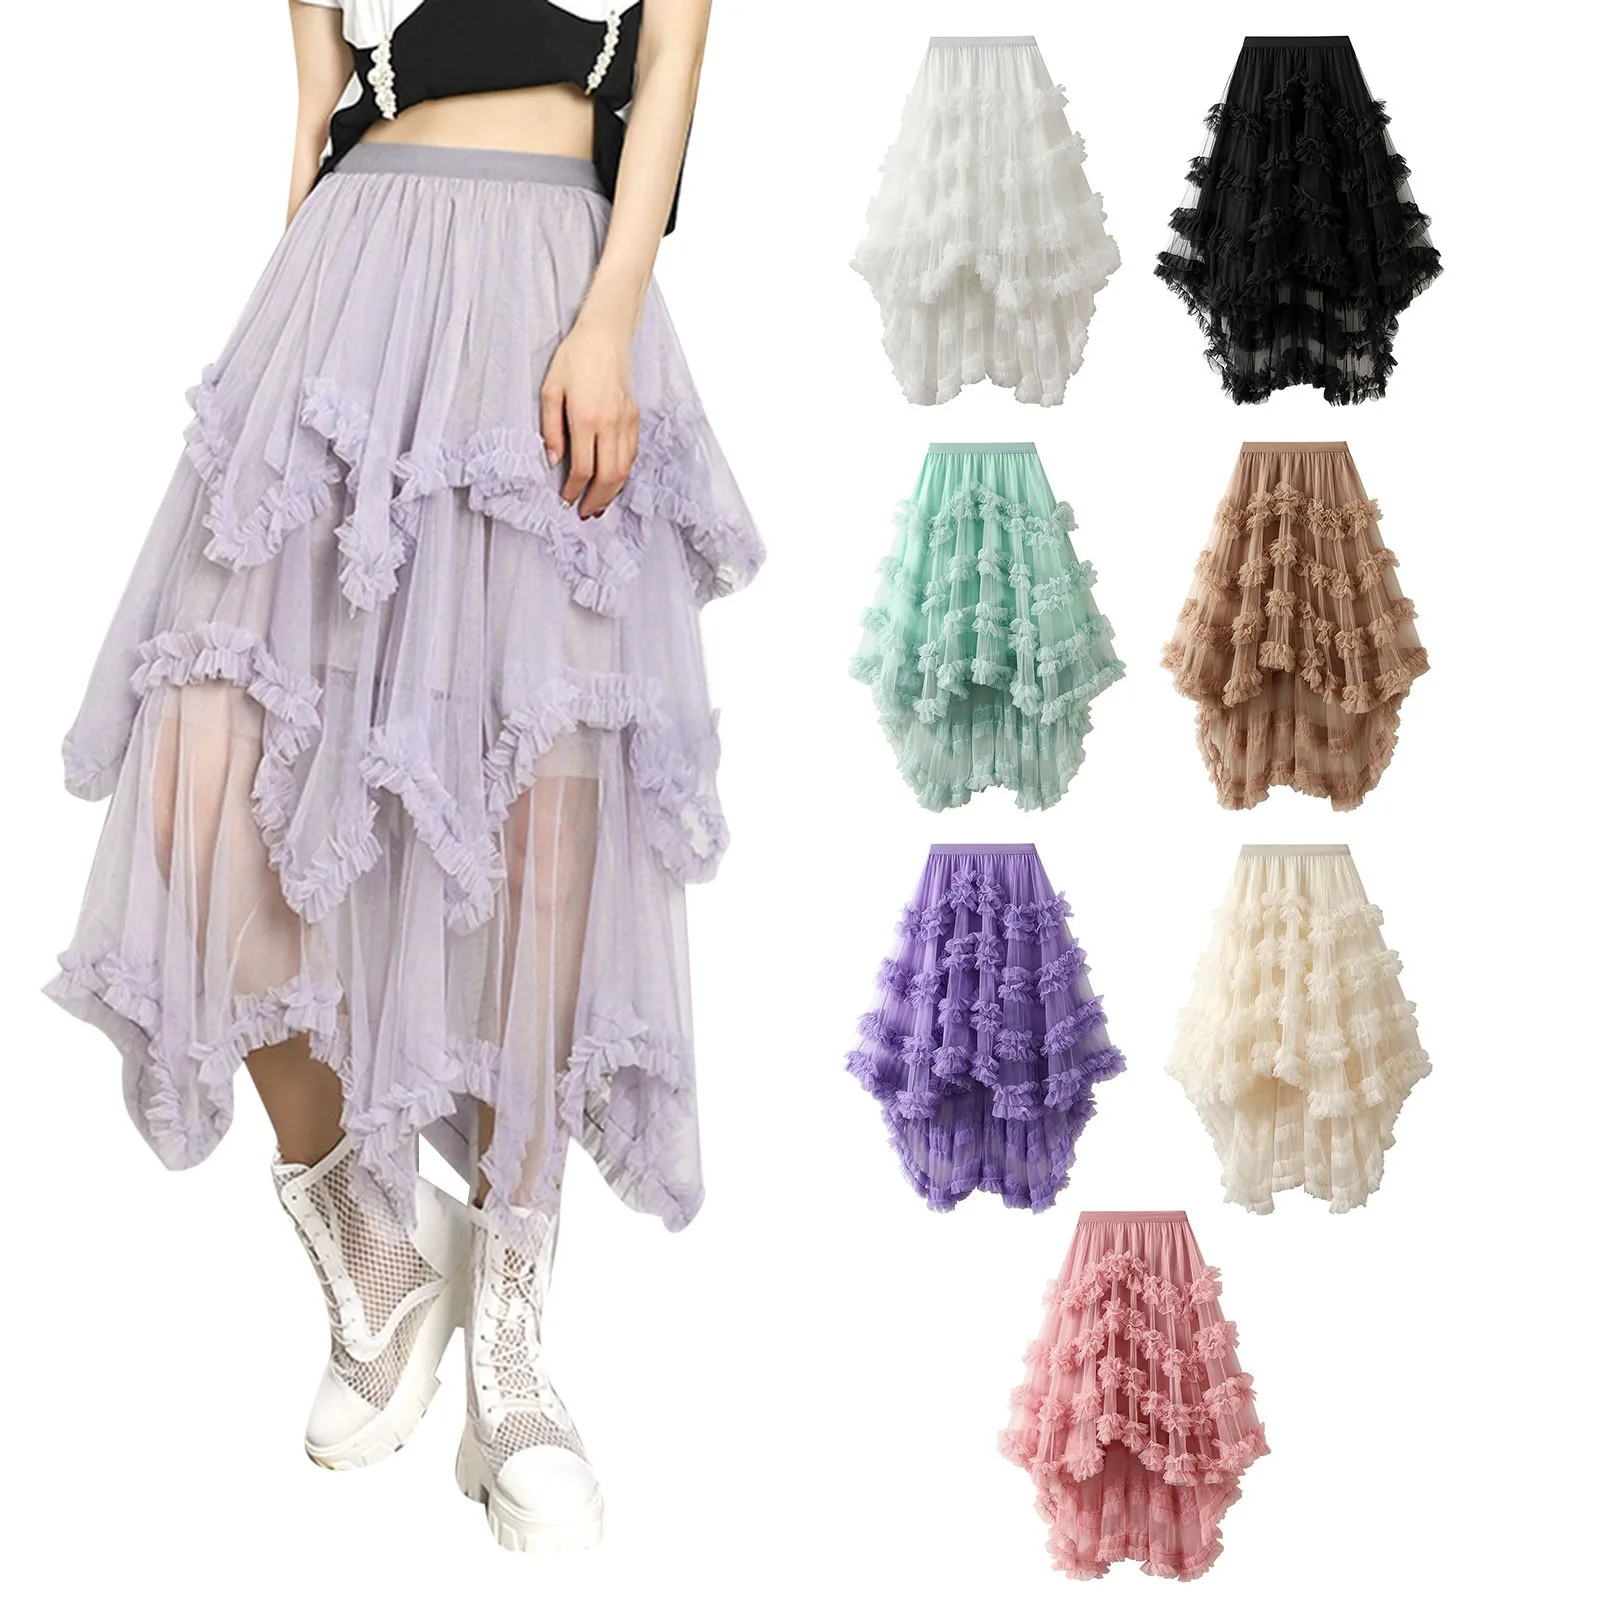 

New Sexy Women Layered Tulle Long Skirt Fashion High Waist Solid Color Frill Trim Ruffle Midi Skirt Daily Wear Street Style Hot